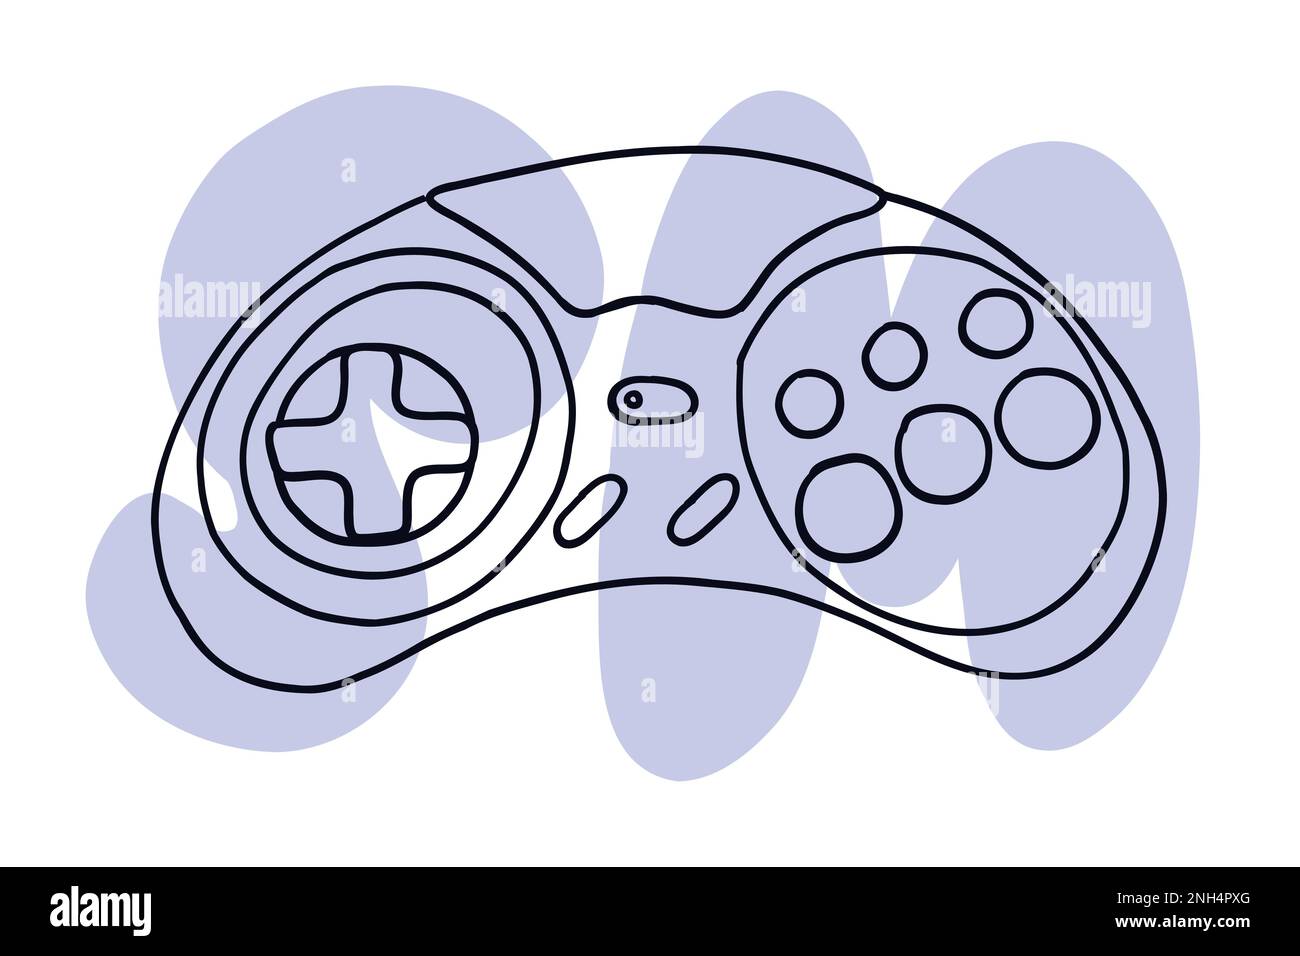 Game retro controller. Vector illustration in hand-drawn cartoon flat style isolated on white background. Stock Vector